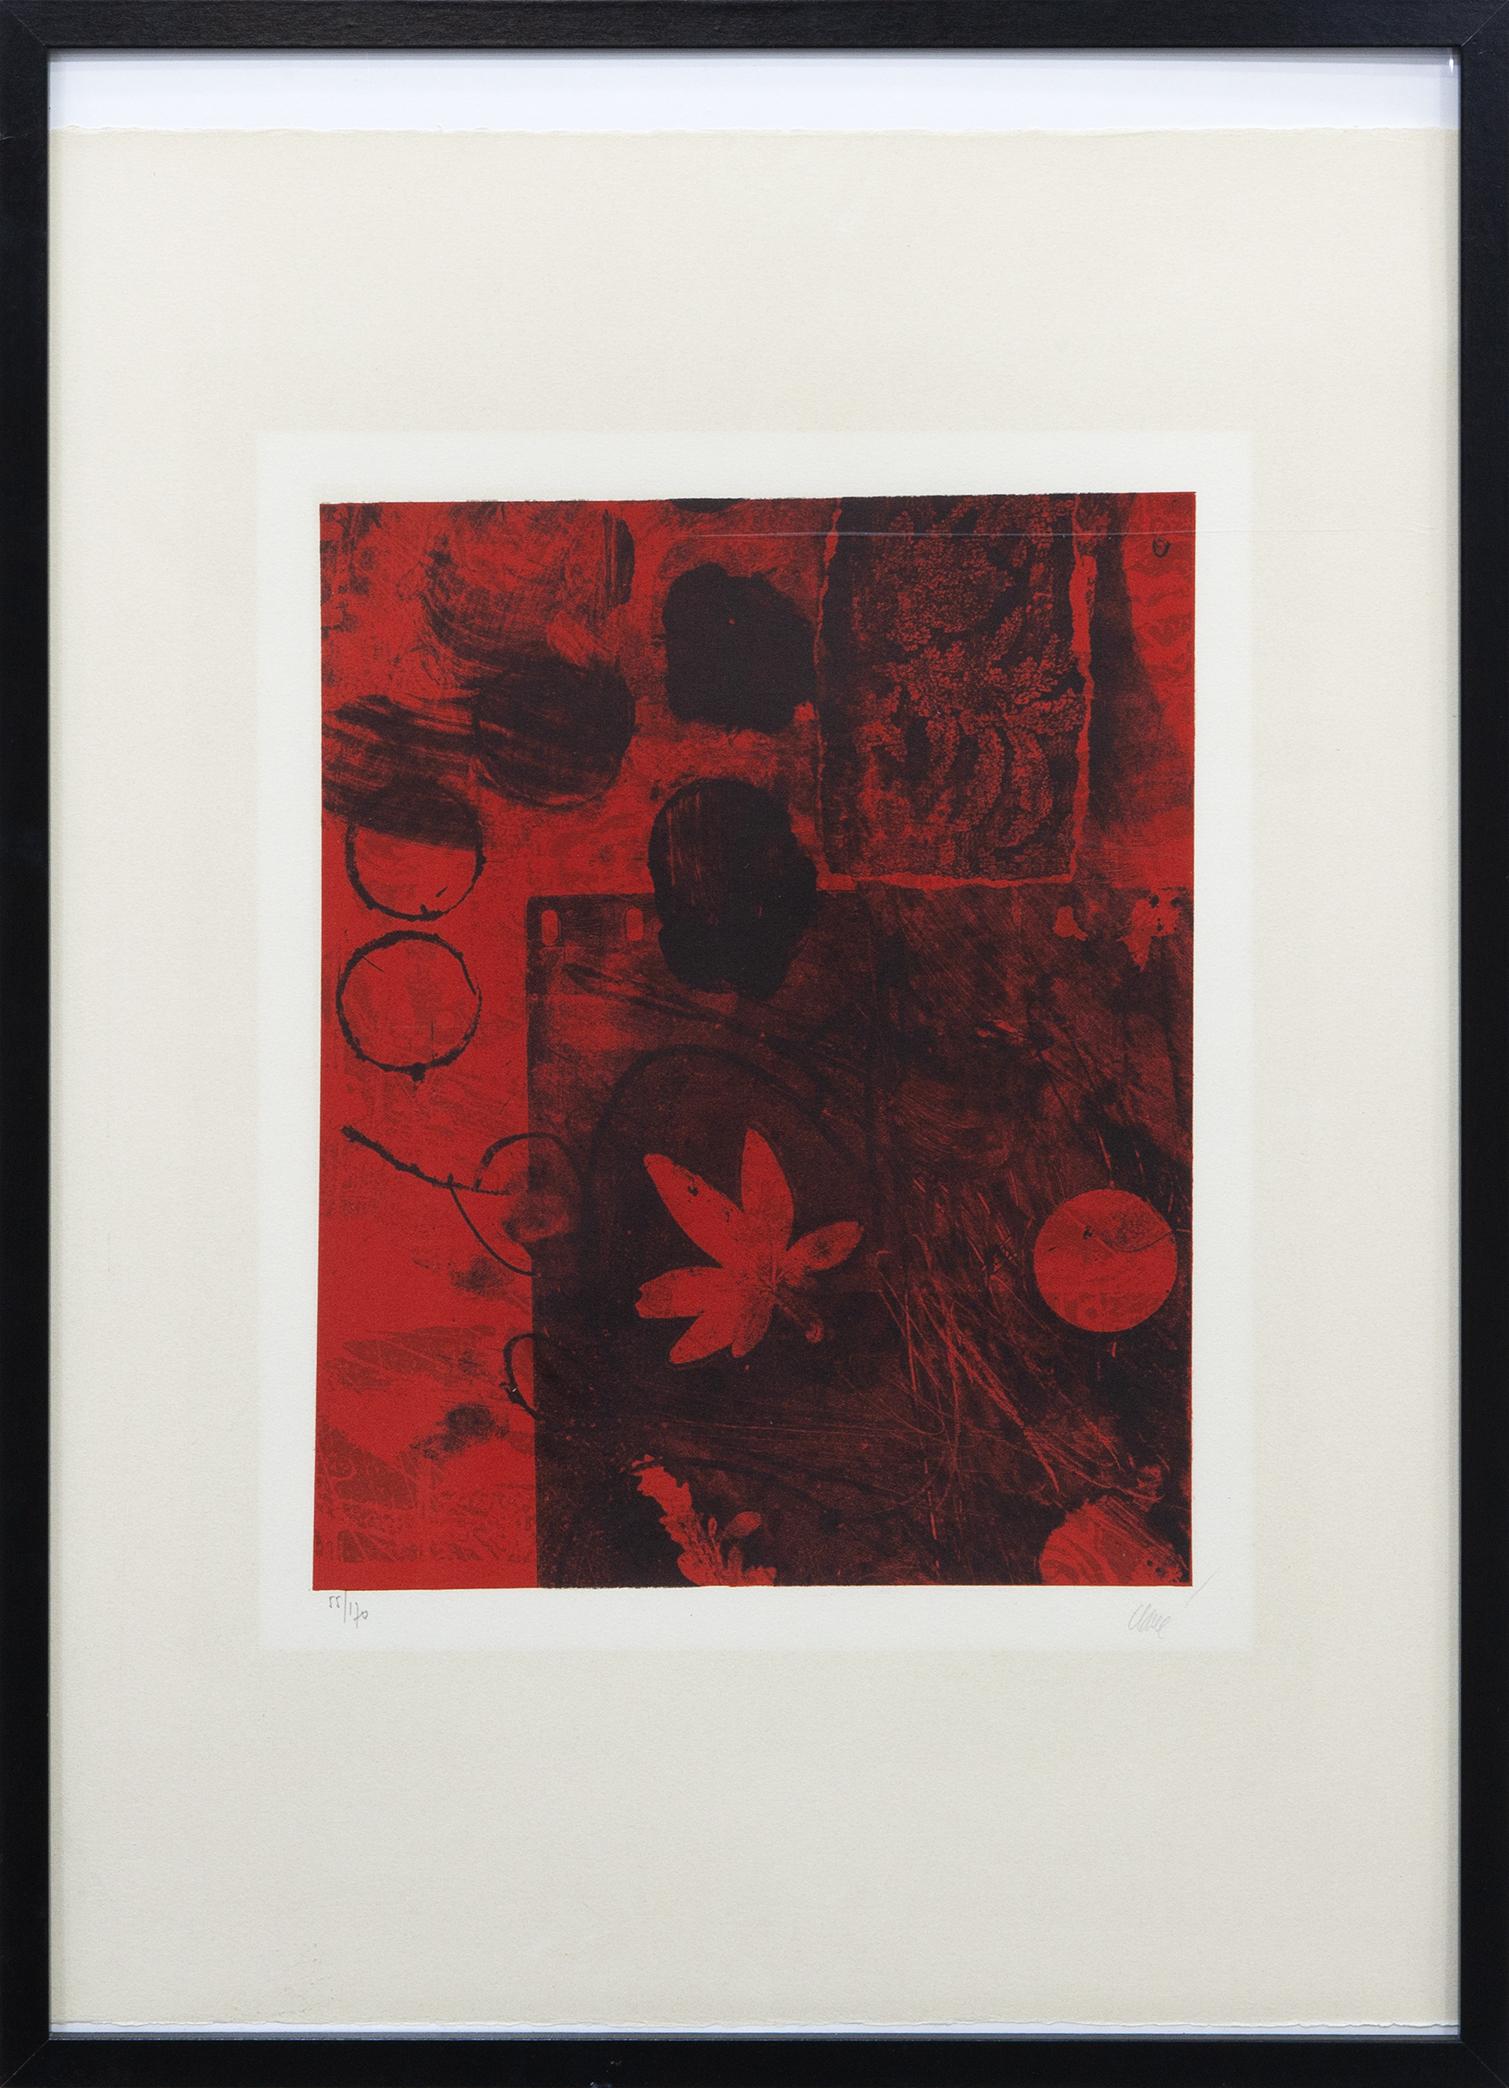 FEUILLE ROUGE, 1975